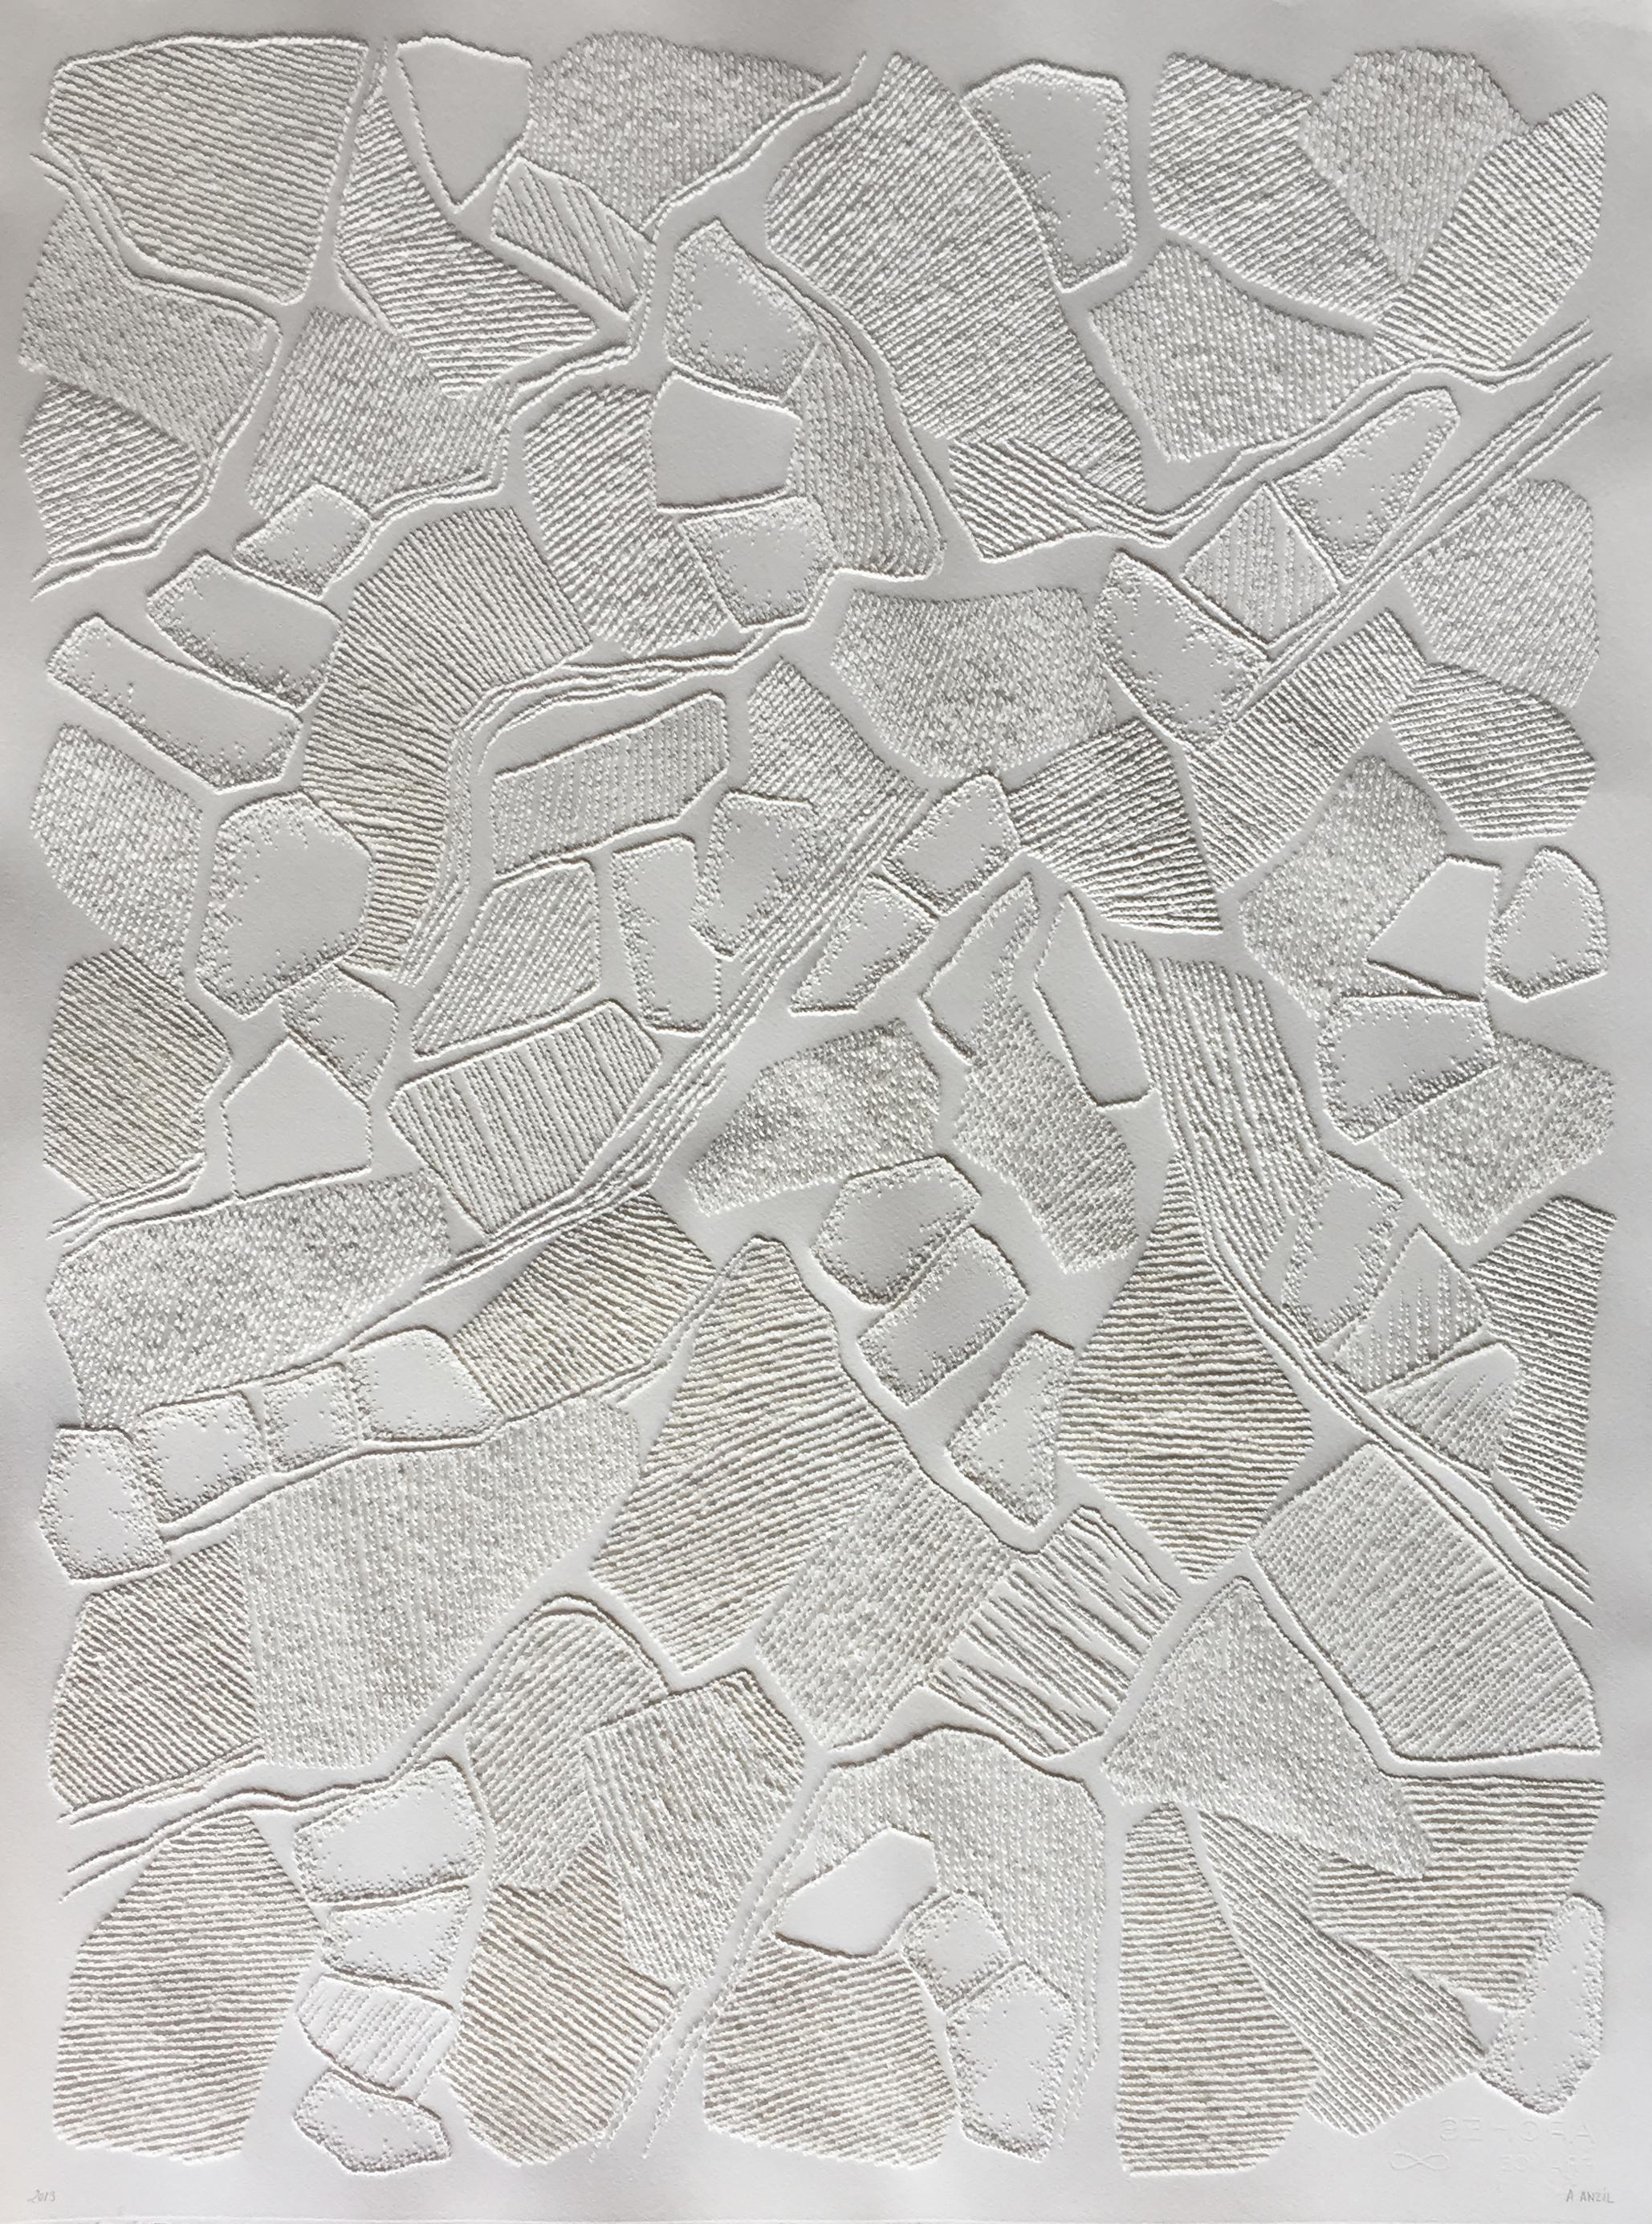 Antonin Anzil Abstract Drawing – Untitled 1 - intricate white 3D abstract geometric drypoint drawing on paper 